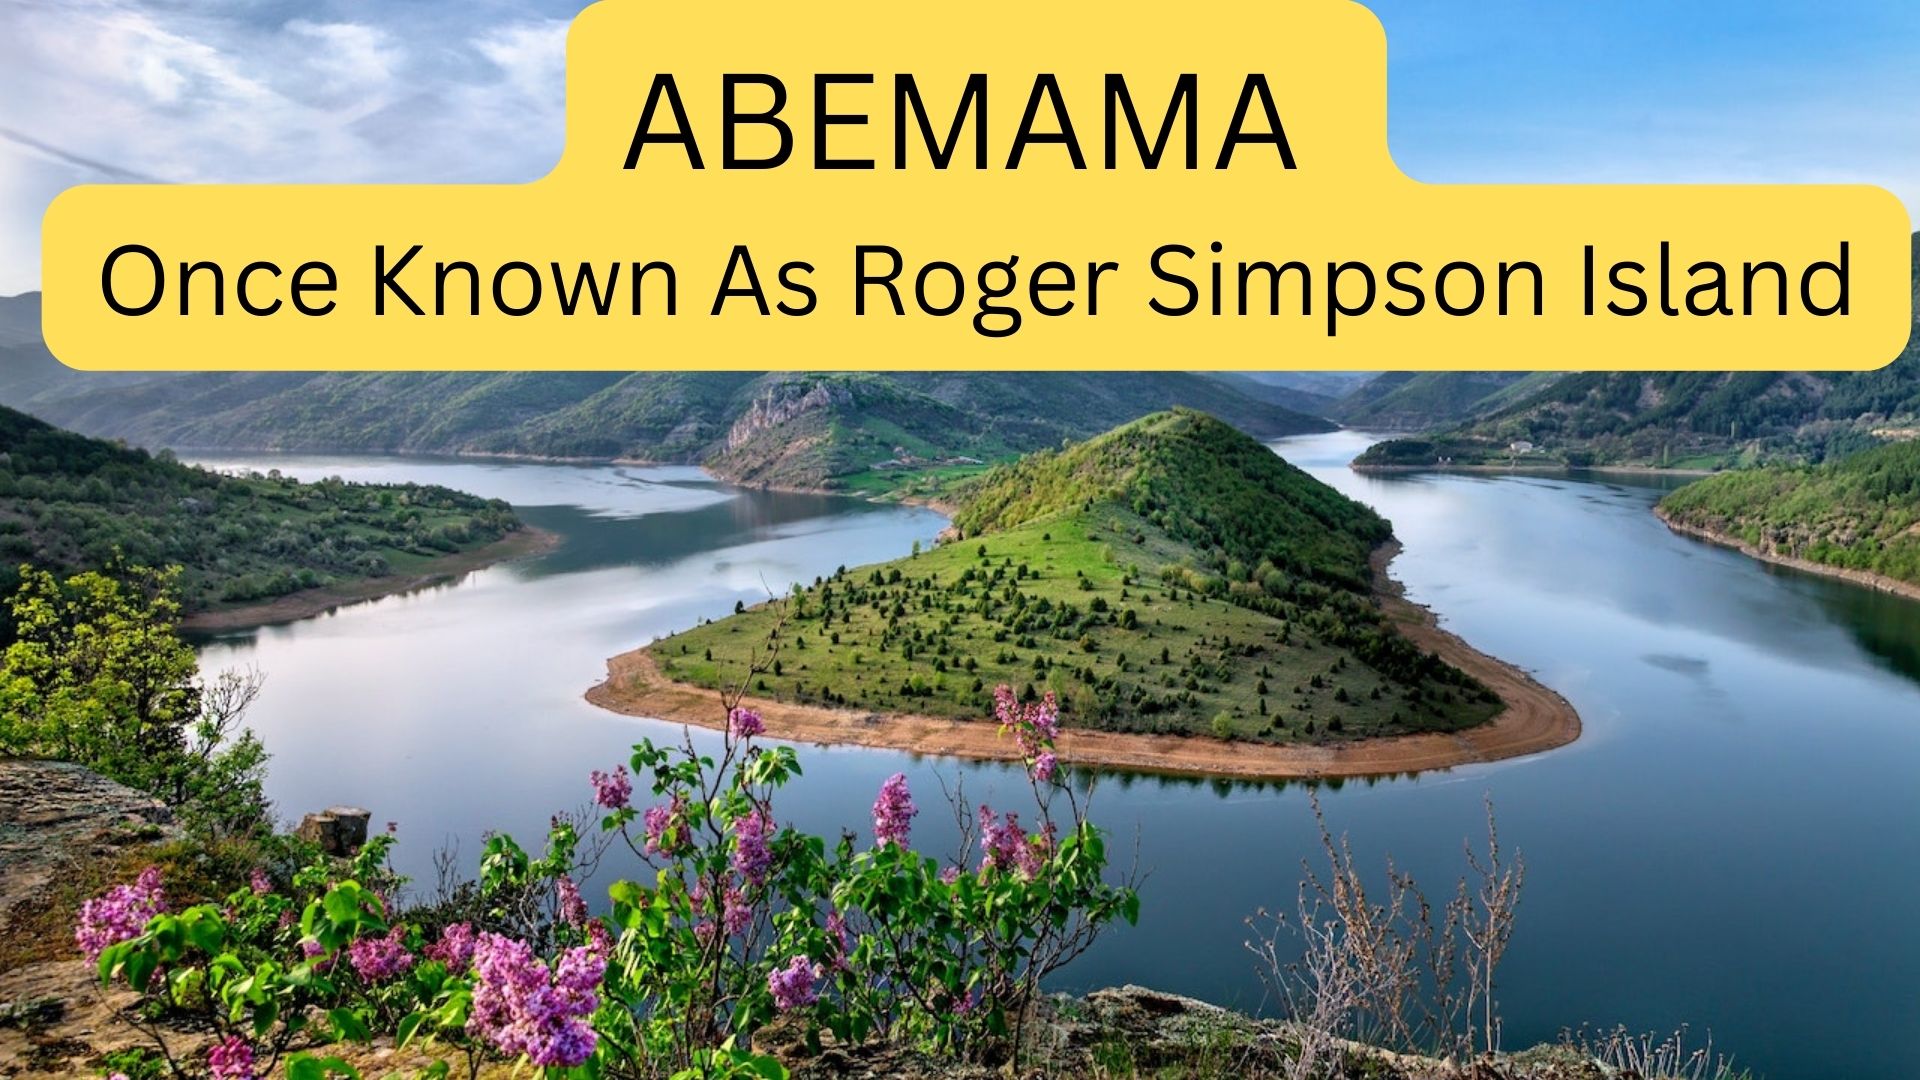 Abemama - Once Known As Roger Simpson Island